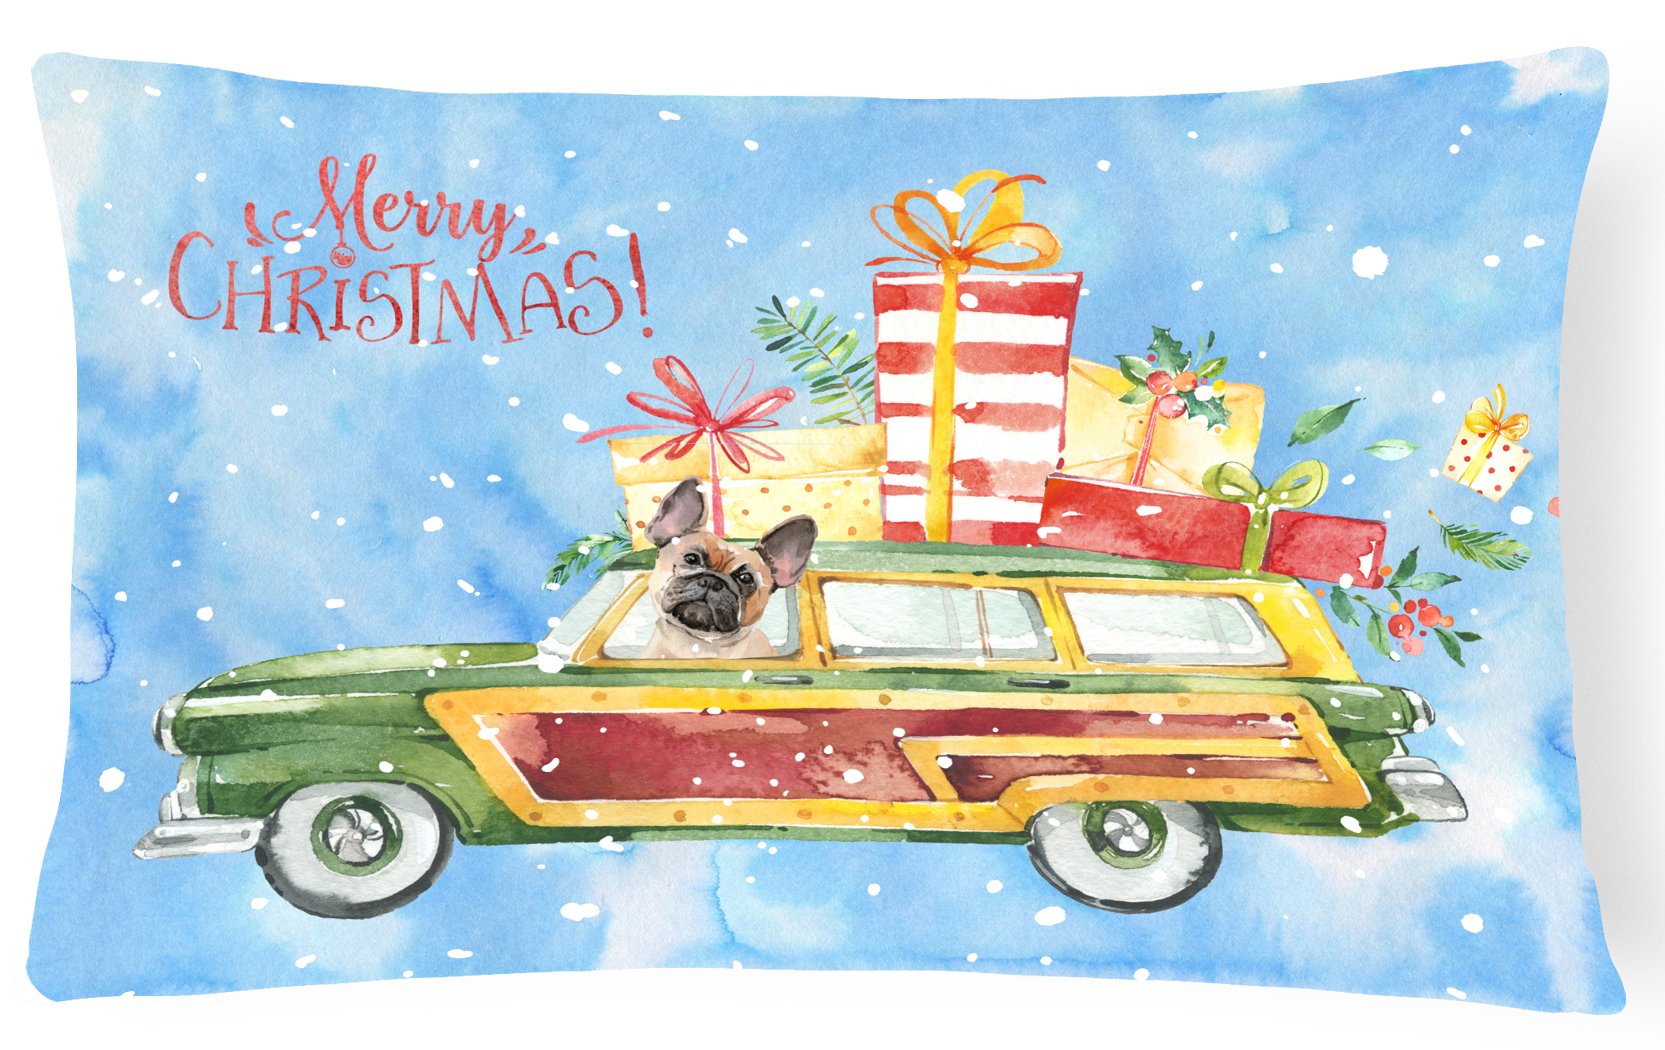 Merry Christmas Fawn French Bulldog Canvas Fabric Decorative Pillow CK2454PW1216 by Caroline's Treasures